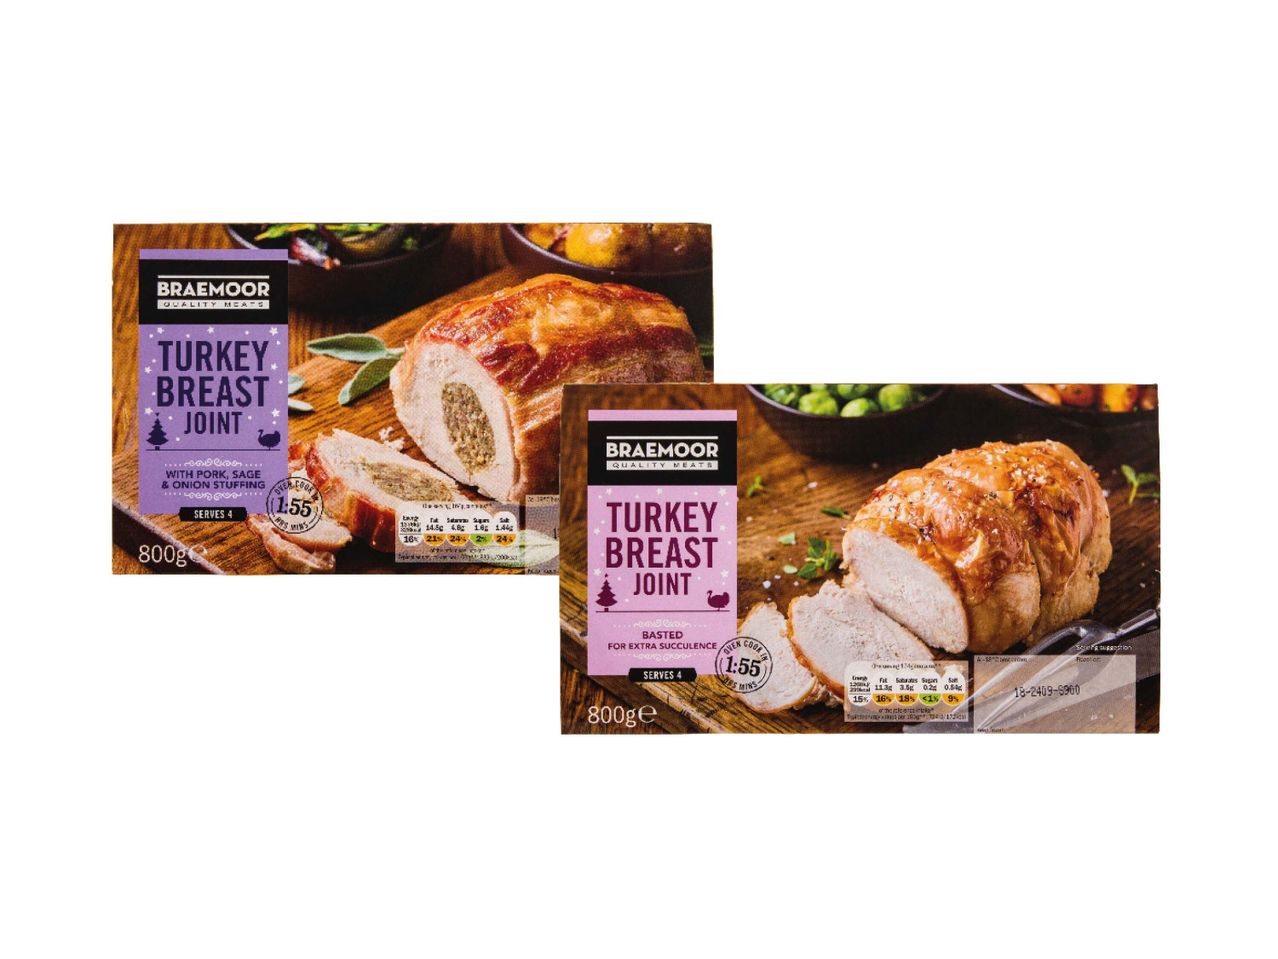 Go to full screen view: Turkey Breast Joints - Image 1